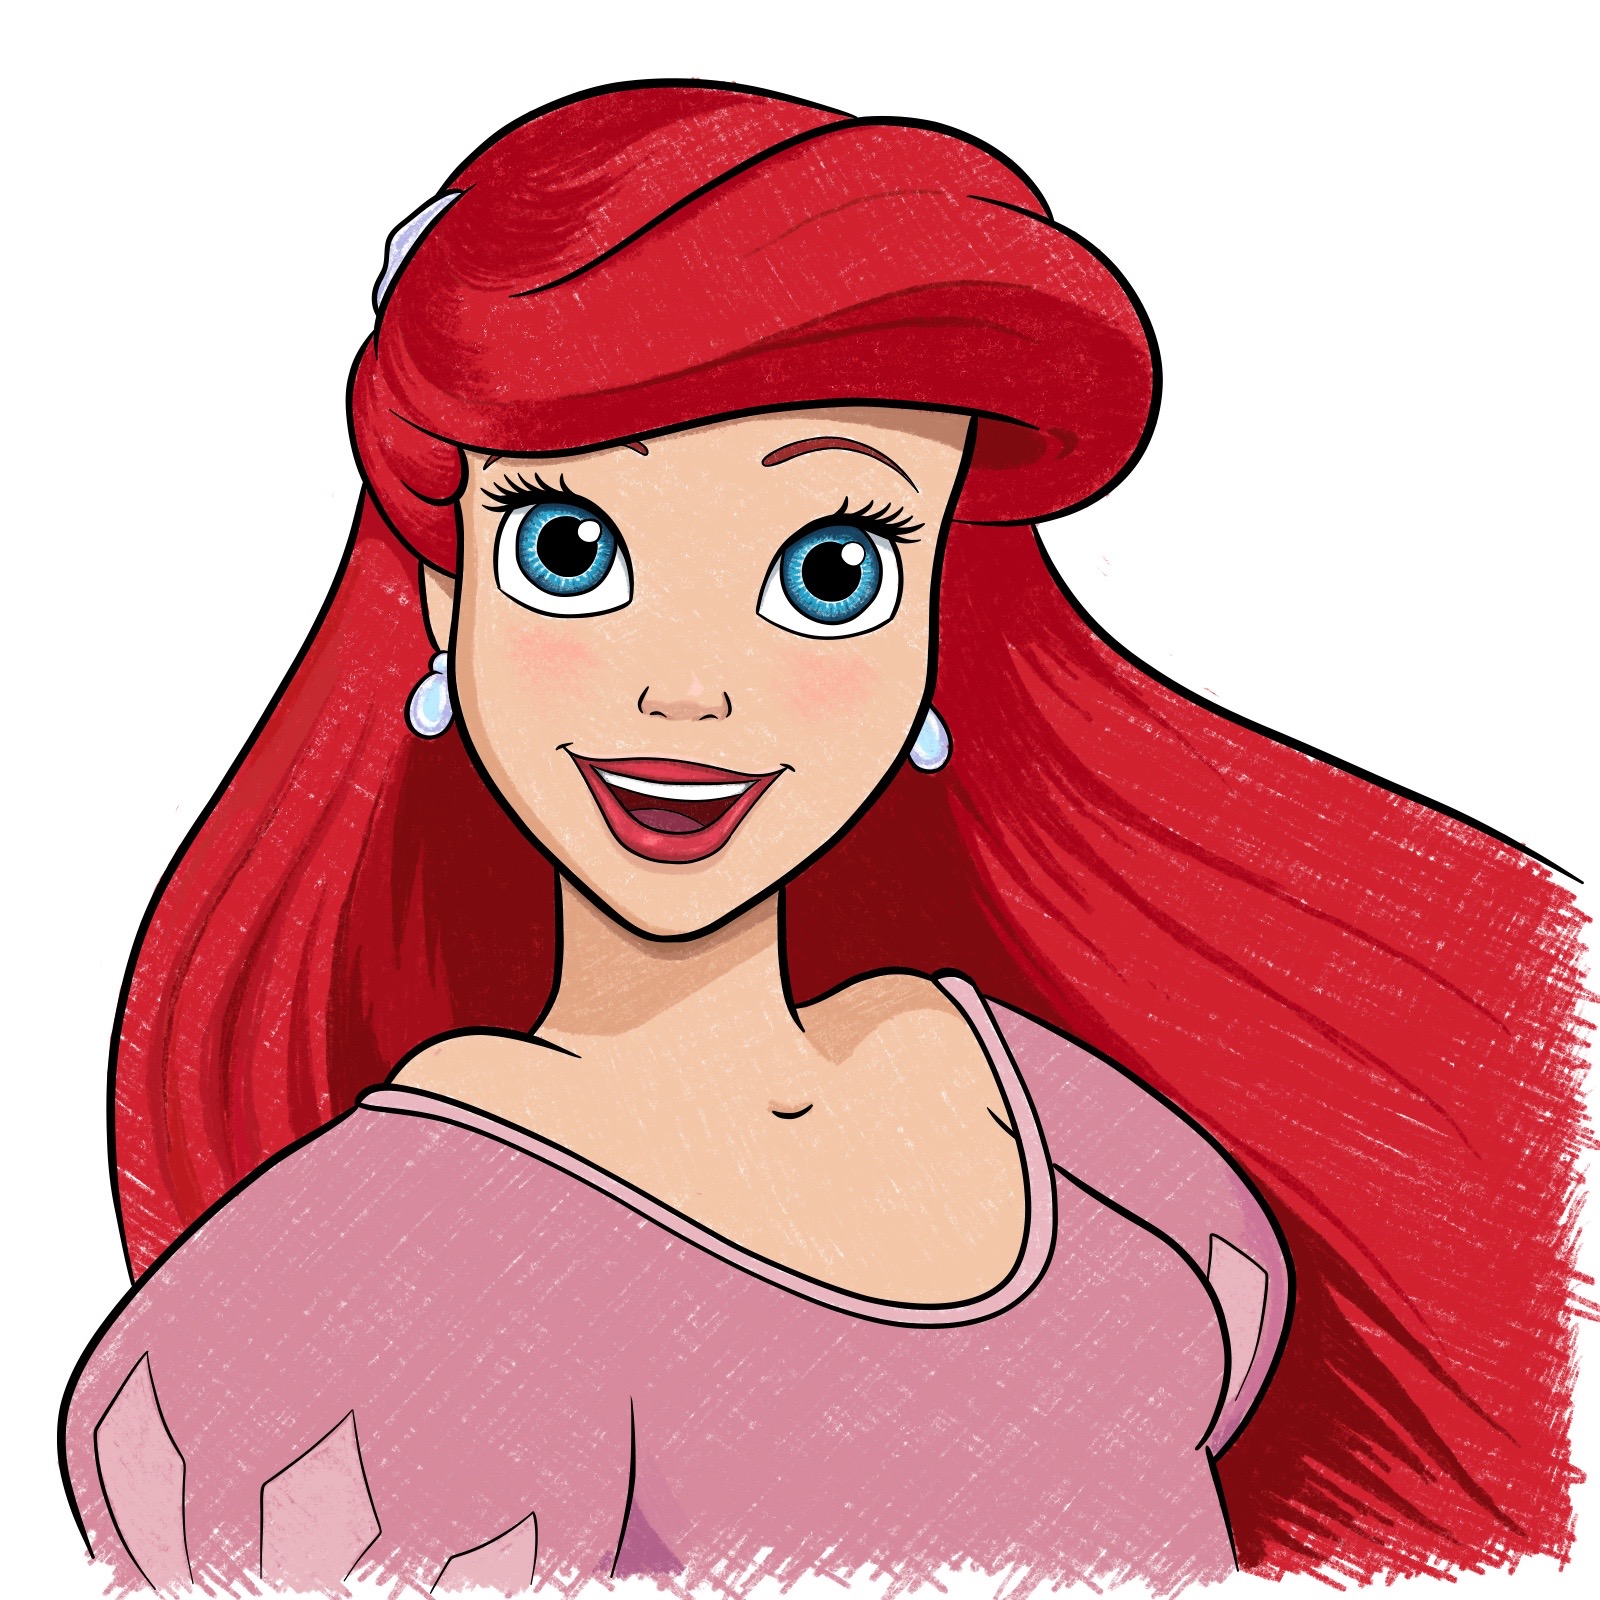 How to draw Ariel's face - The Little Mermaid - step 42